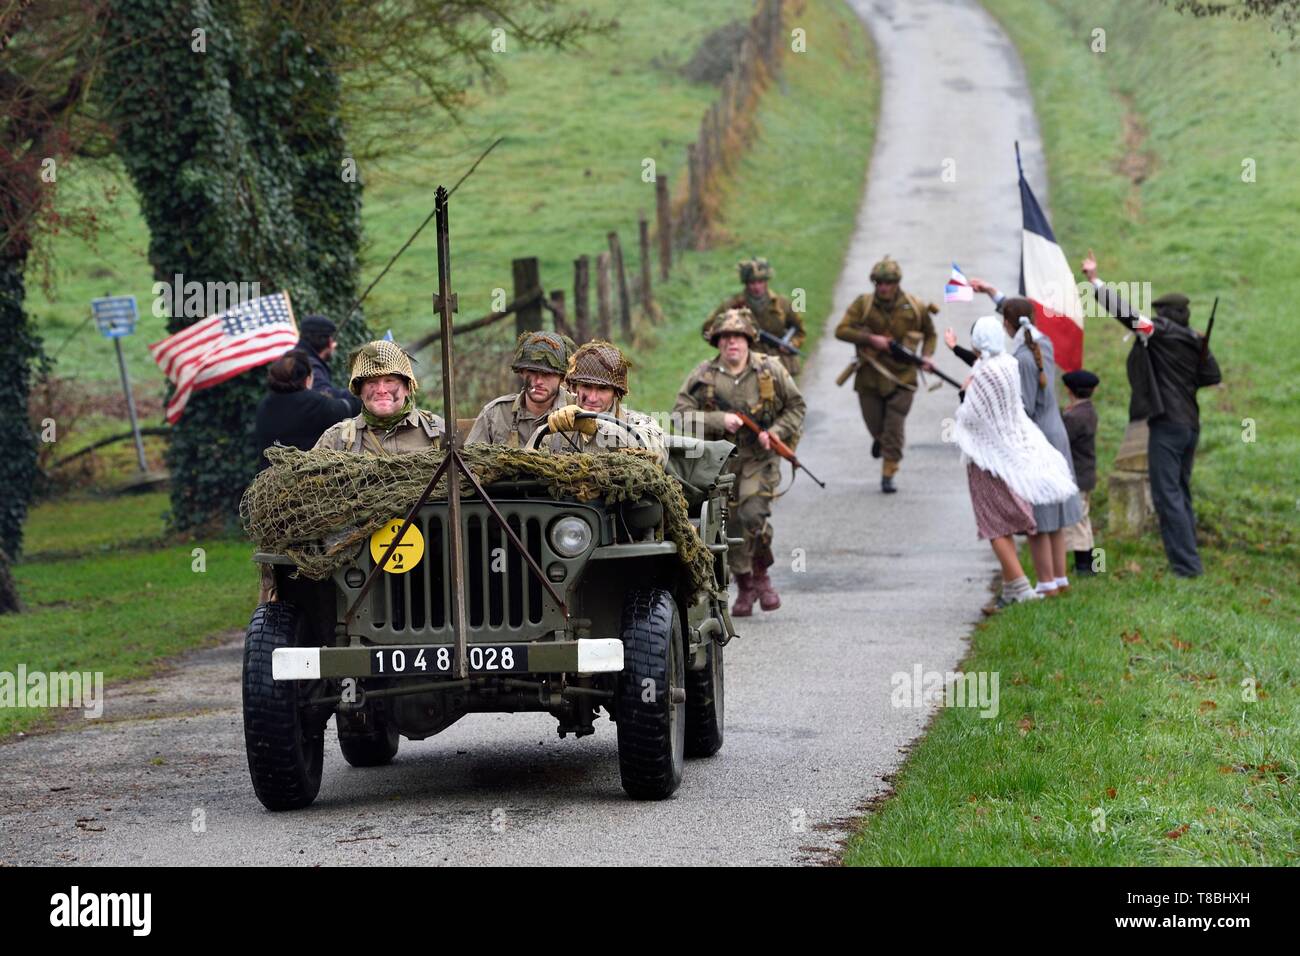 France, Eure, Sainte Colombe prÚs Vernon, Allied Reconstitution Group (US World War 2 and french Maquis historical reconstruction Association), reenactors in uniform of the 101st US Airborne Division progressing in a jeep Willys welcomed as liberators by villagers and FFI Stock Photo